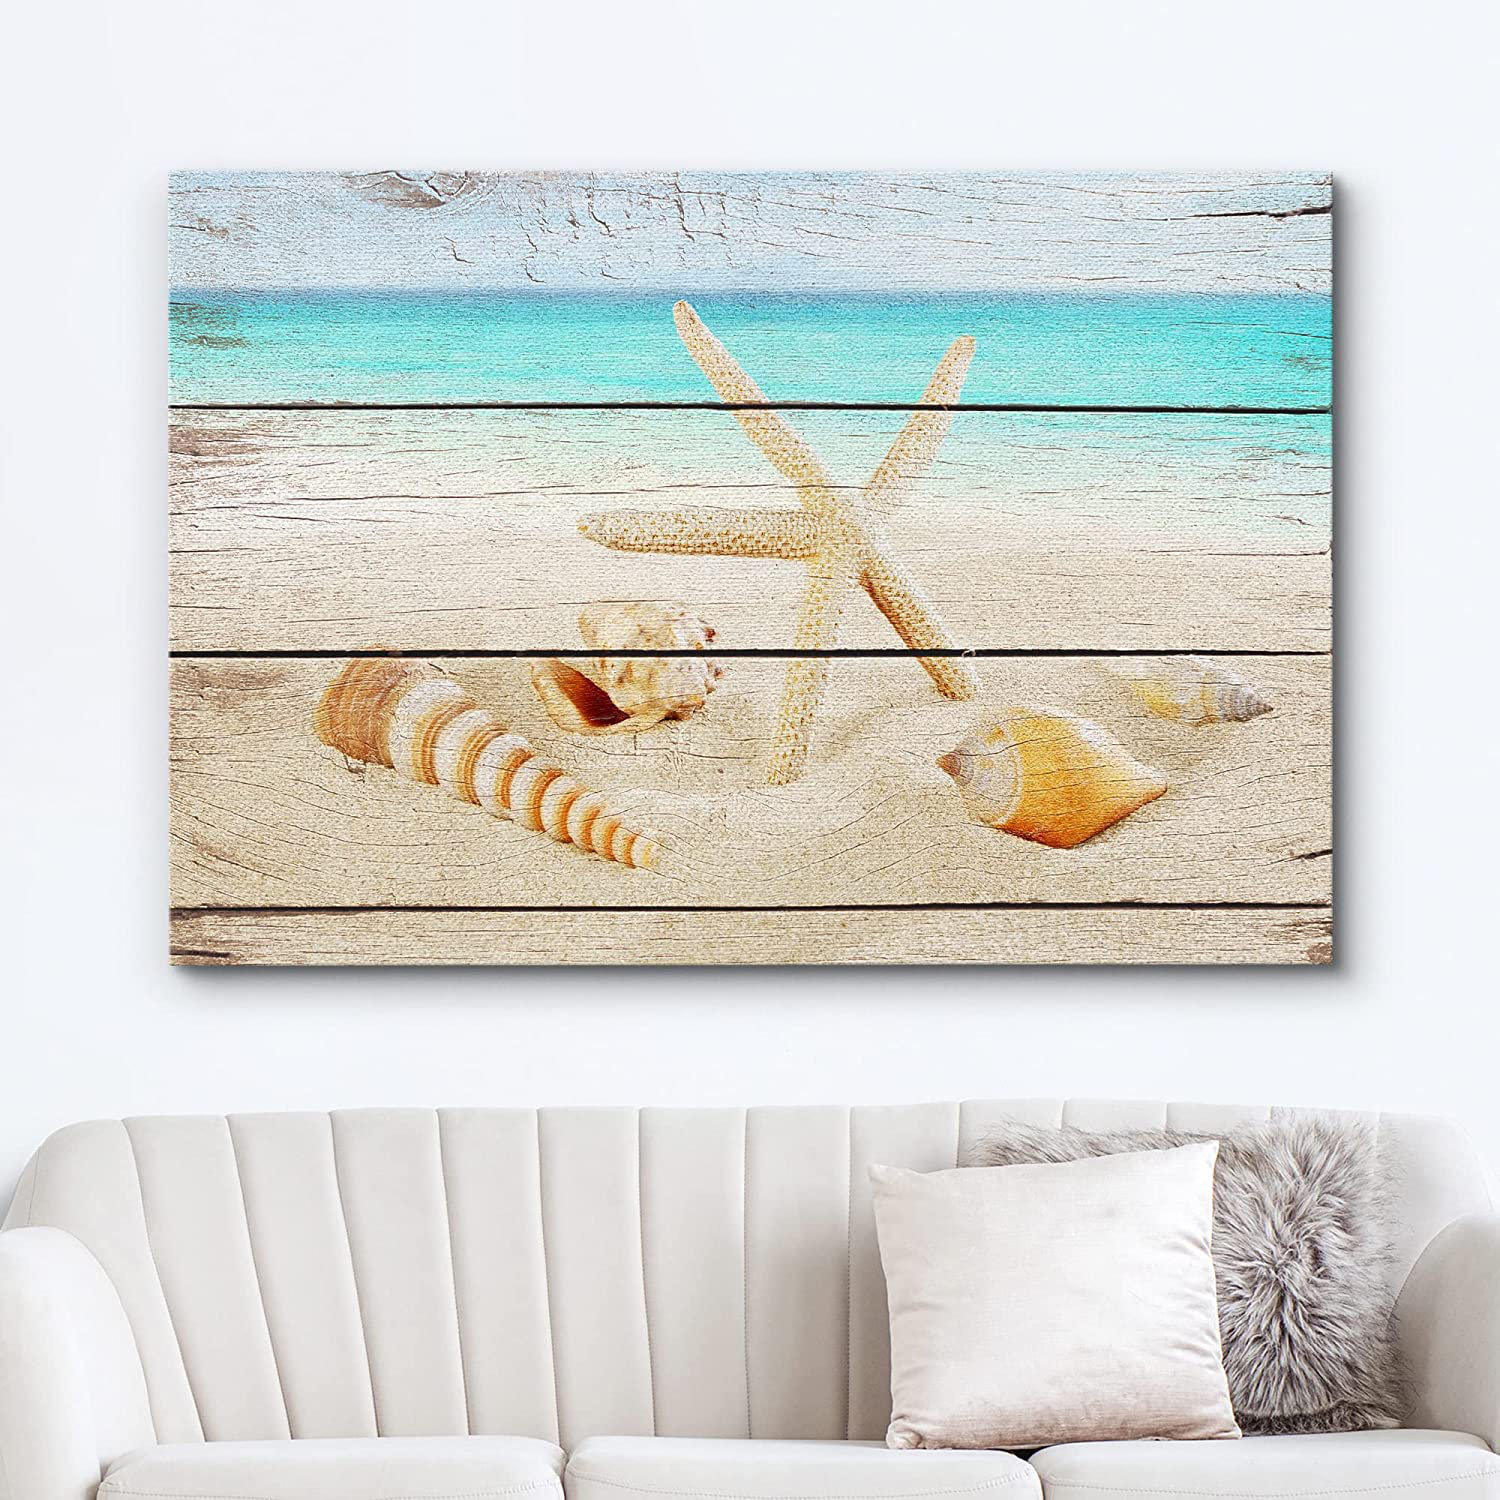 IDEA4WALL Starfish And Seashells On The Beach On Canvas Graphic